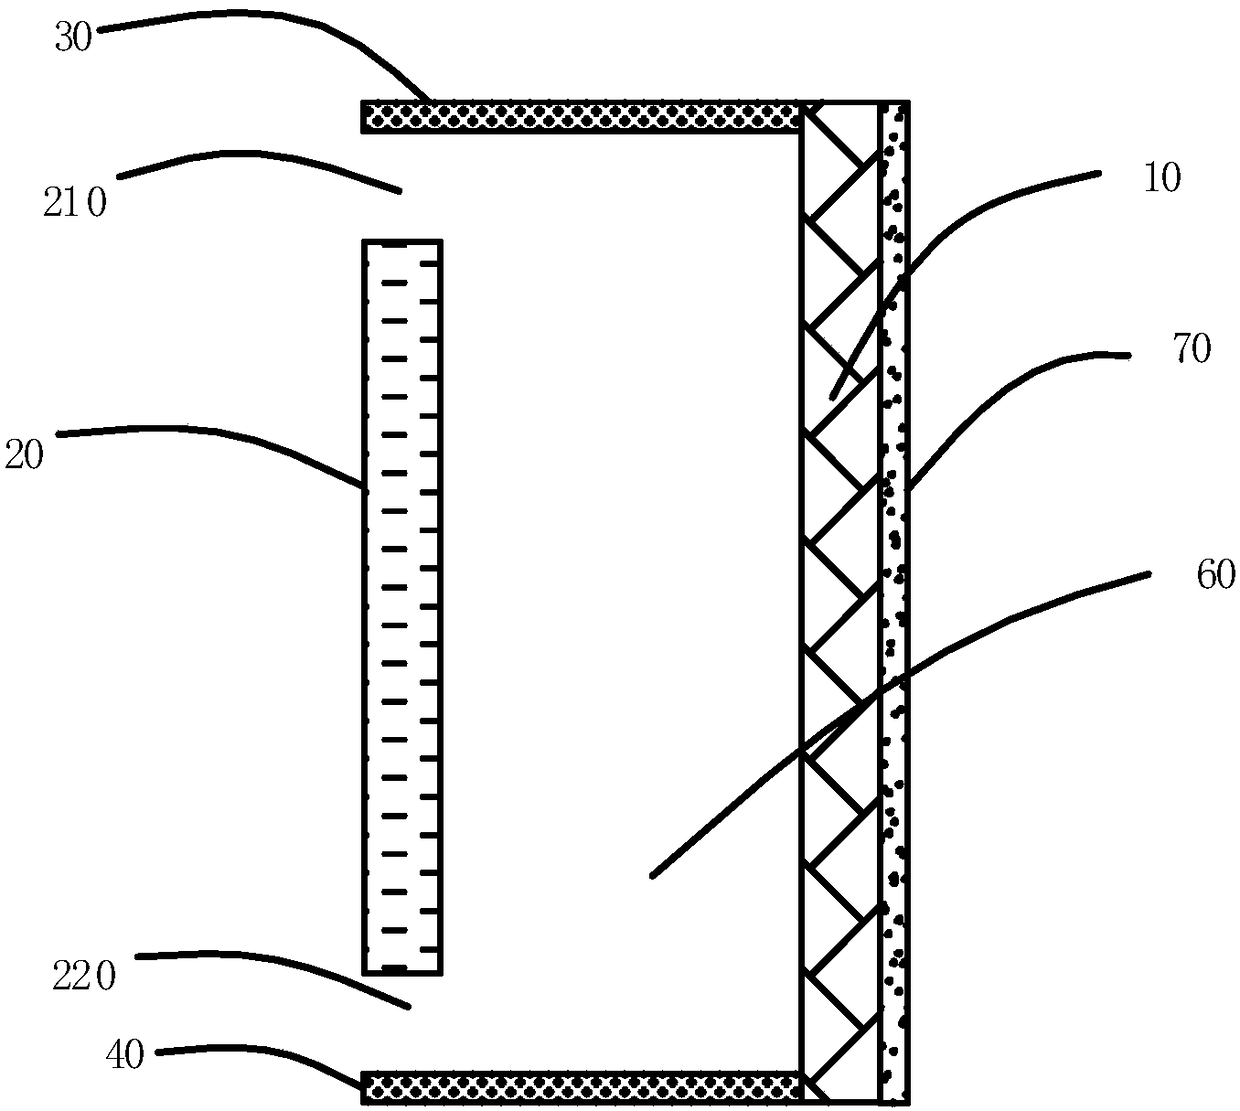 Hollow radiation-cooling passive type structure for building external wall or roof